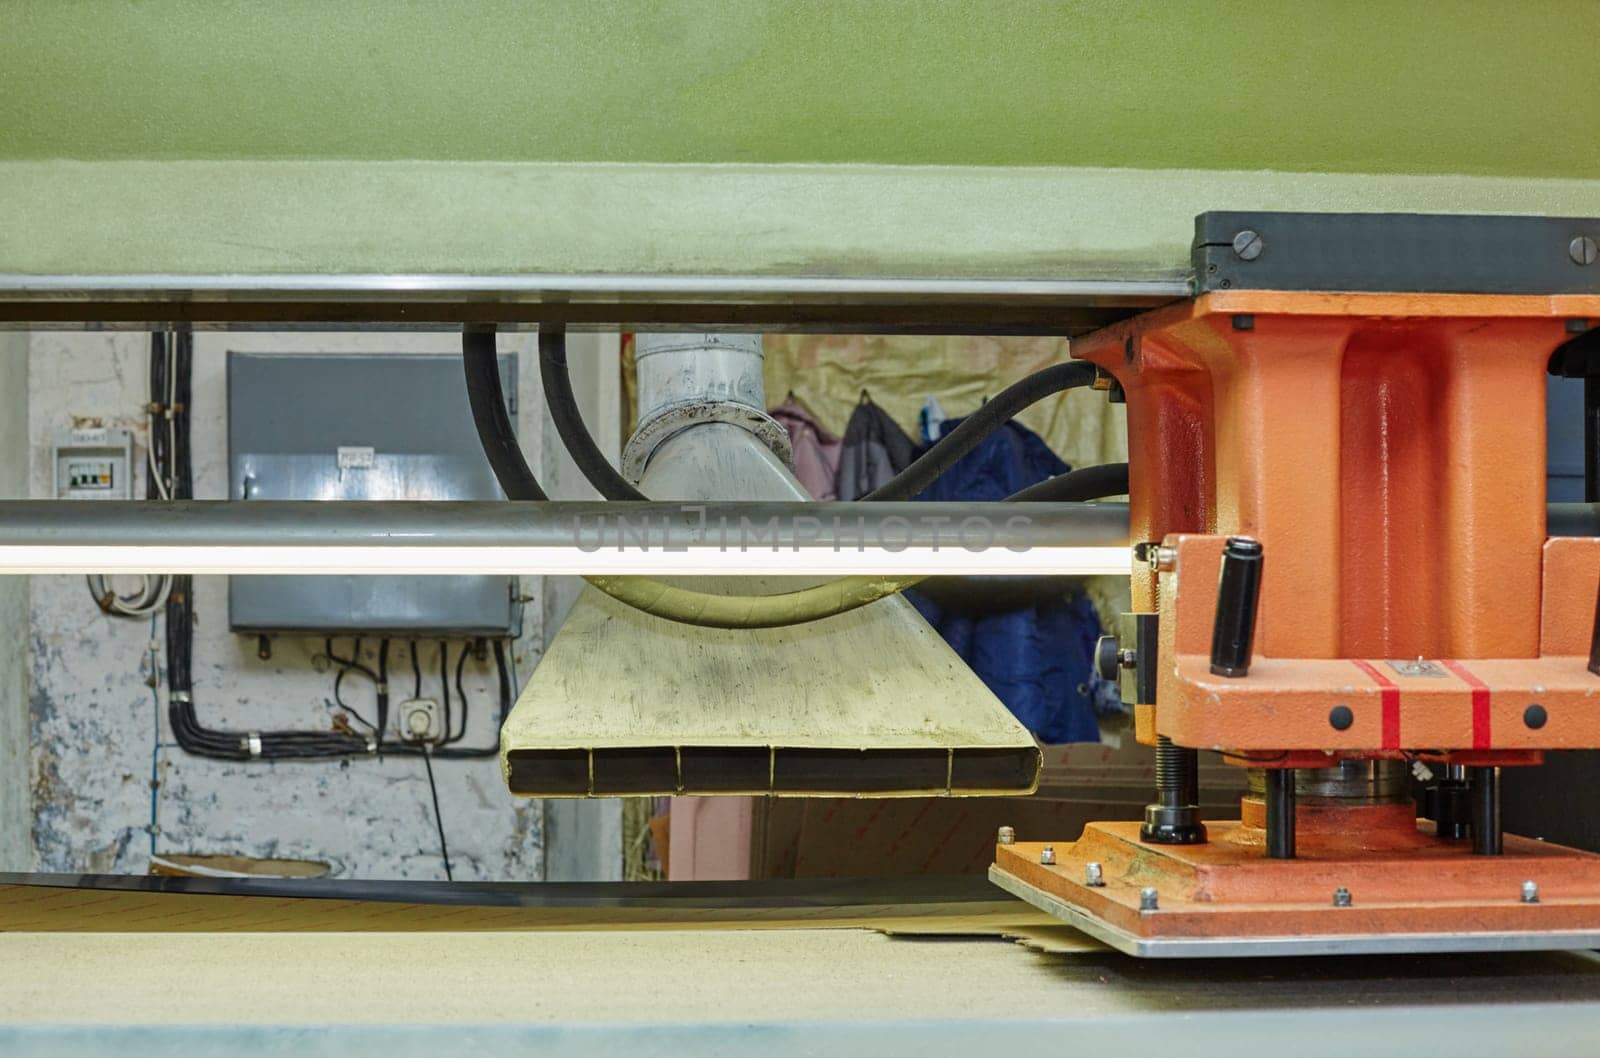 Footwear production. Image of semiautomatic press for manufacturing insoles